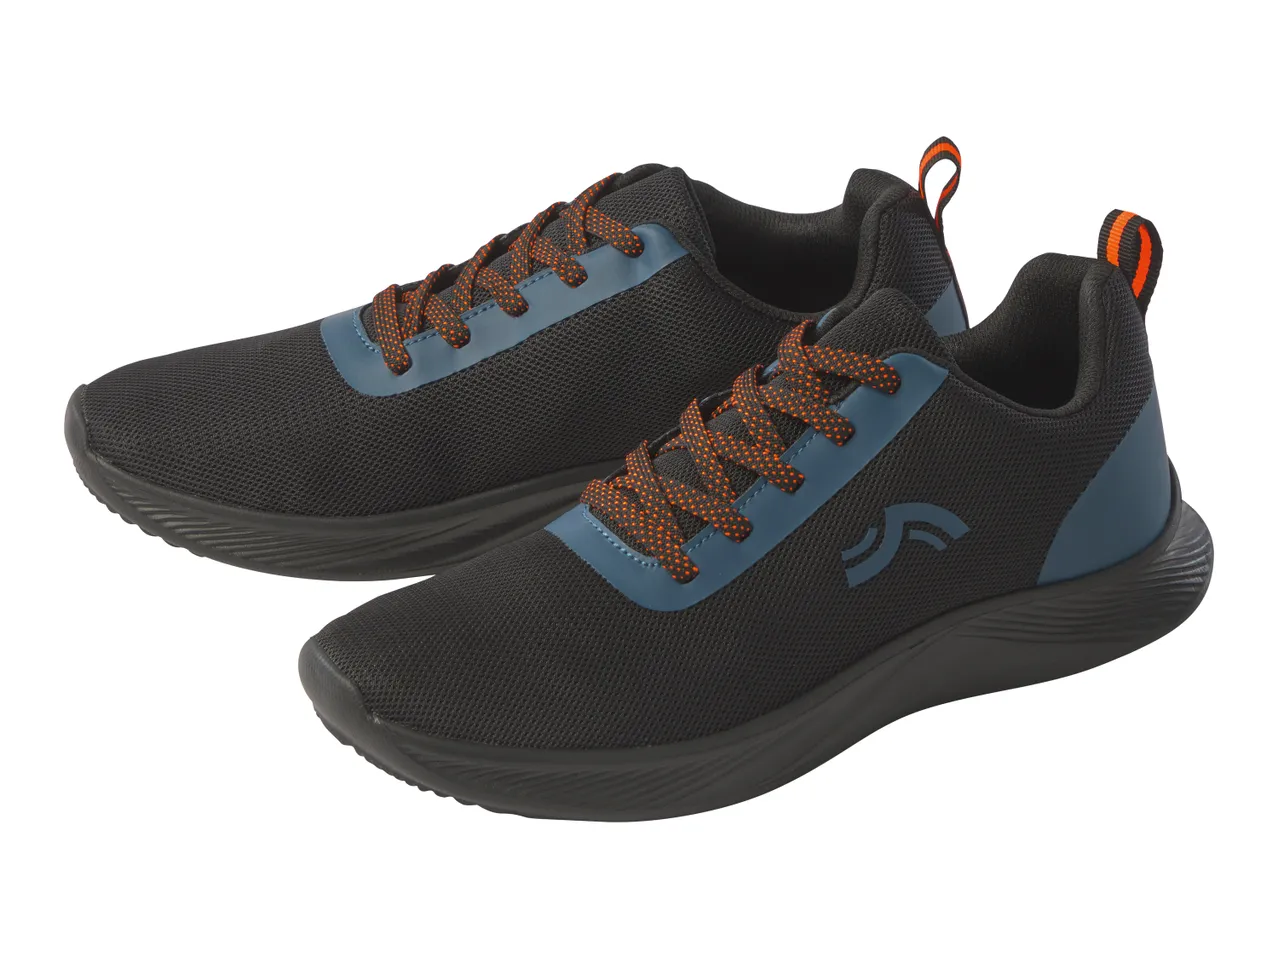 Go to full screen view: Crivit Men’s Trainers - Image 14